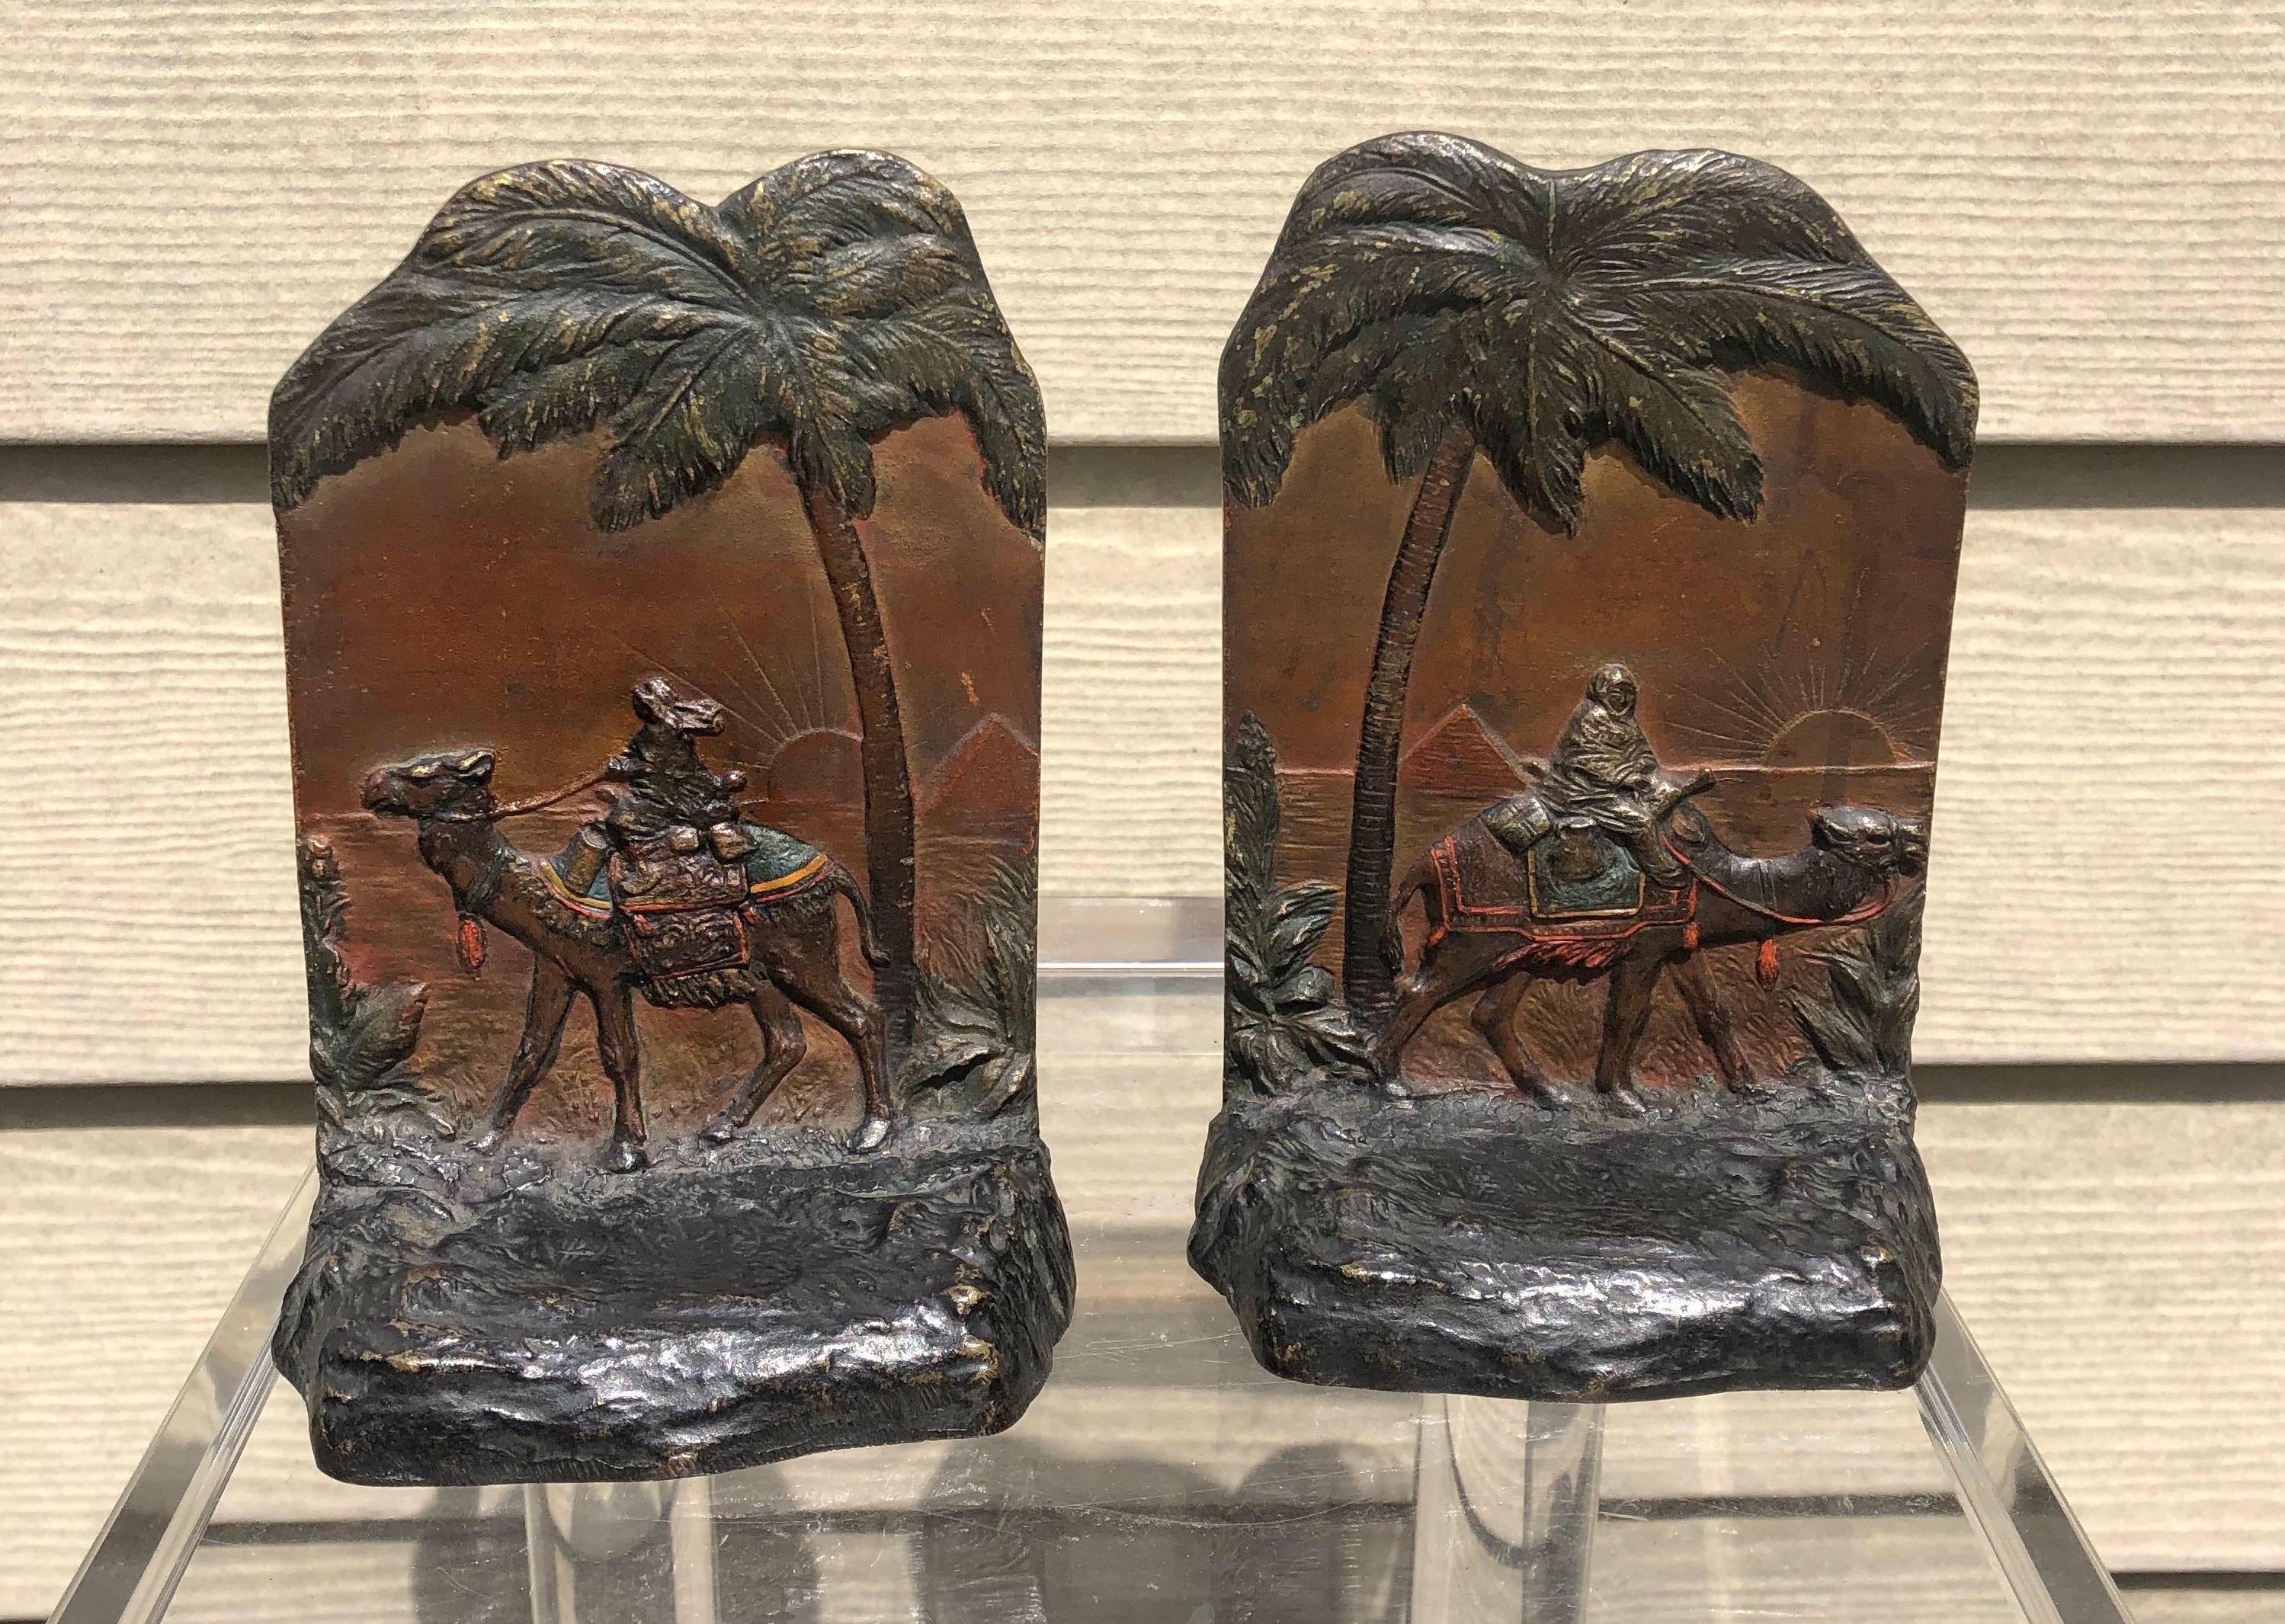 Beautiful early 20th century Austrian cold painted polychrome bookends depicting Egyptian pyramids, palm trees and camelback trader. Fantastic quality and patina.